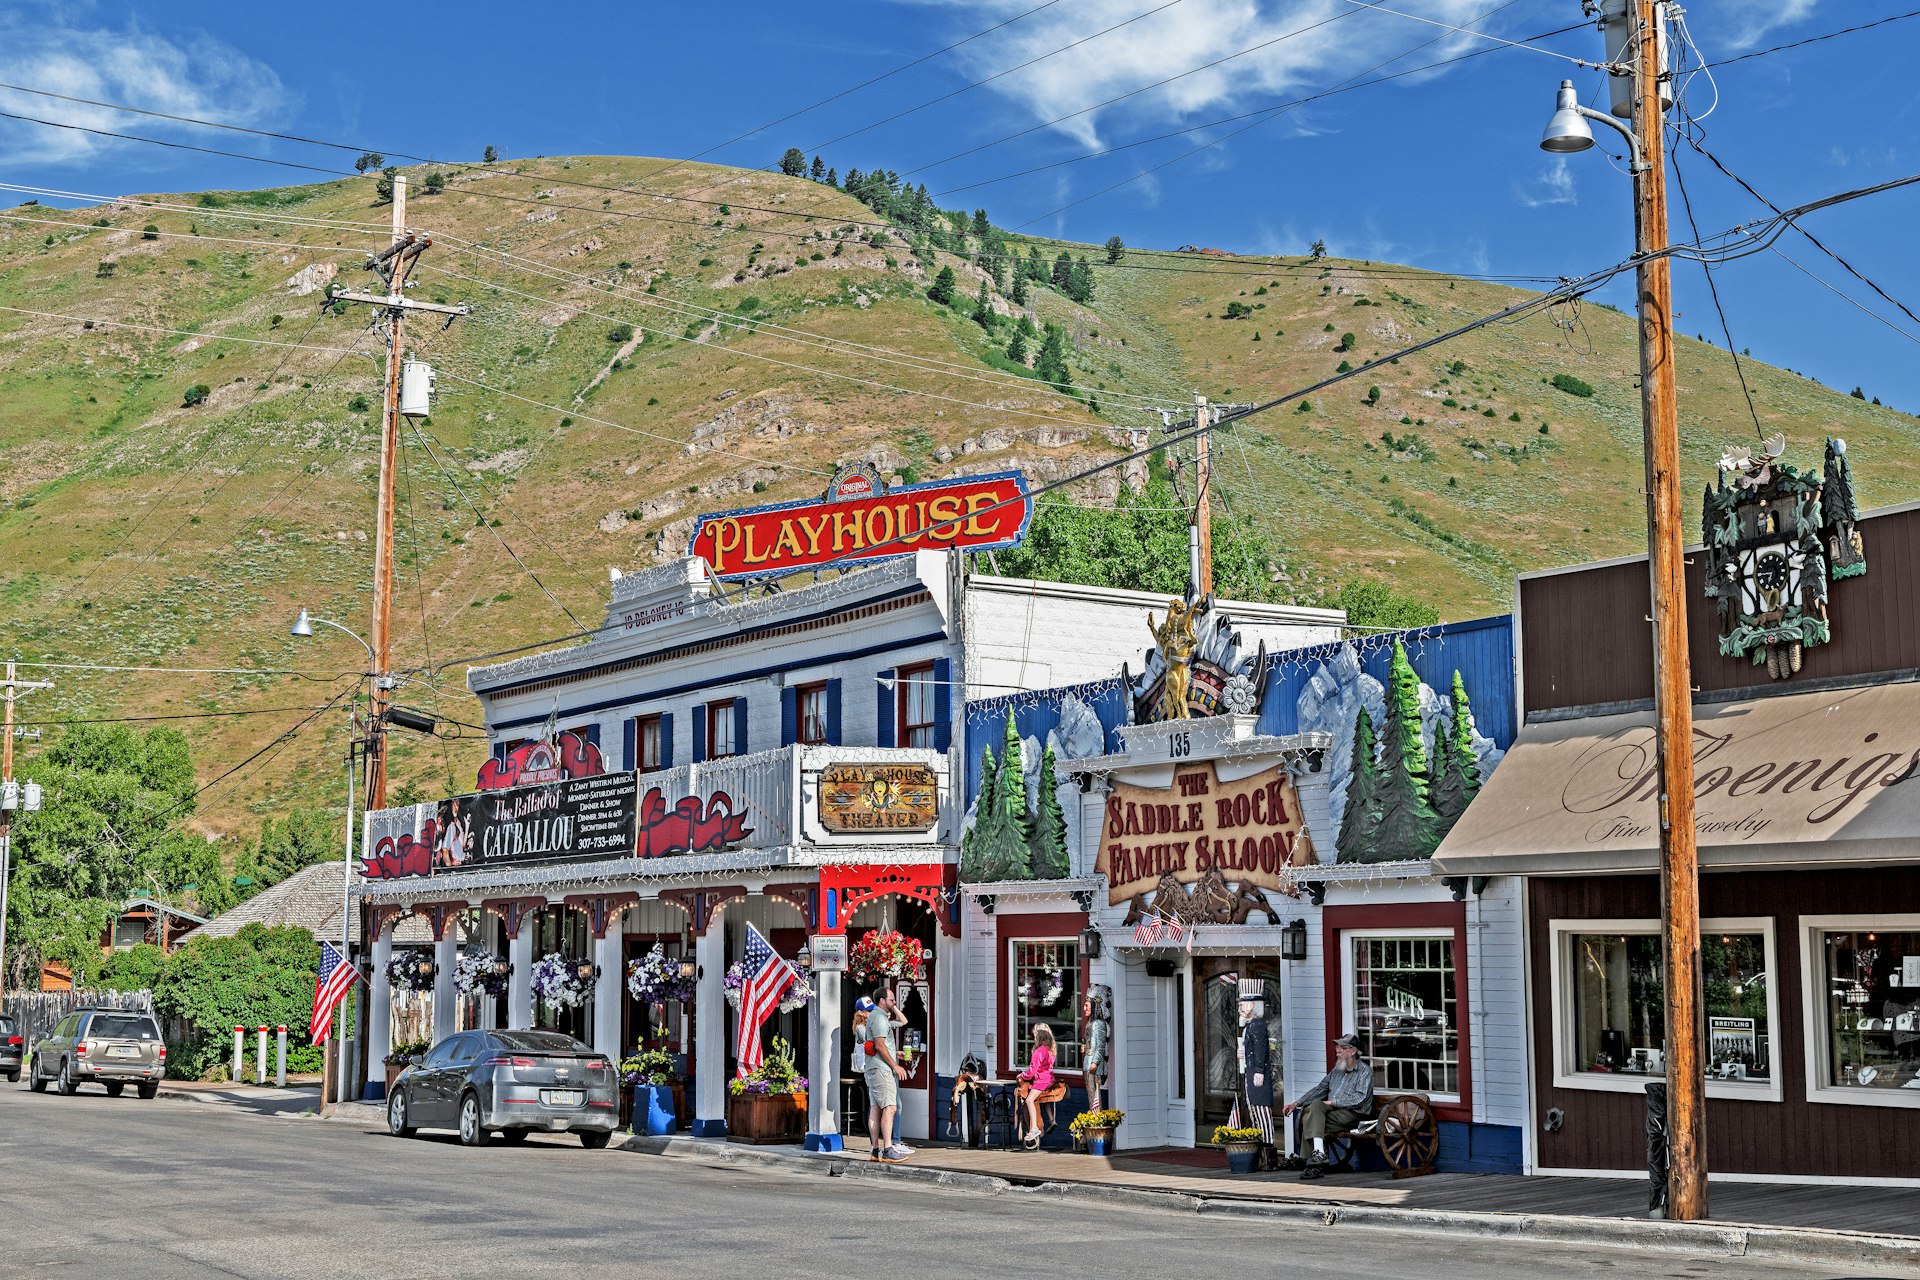 Exterior view of Jackson Hole Playhouse is an old western-style saloon. There is a large green hill in the background. 